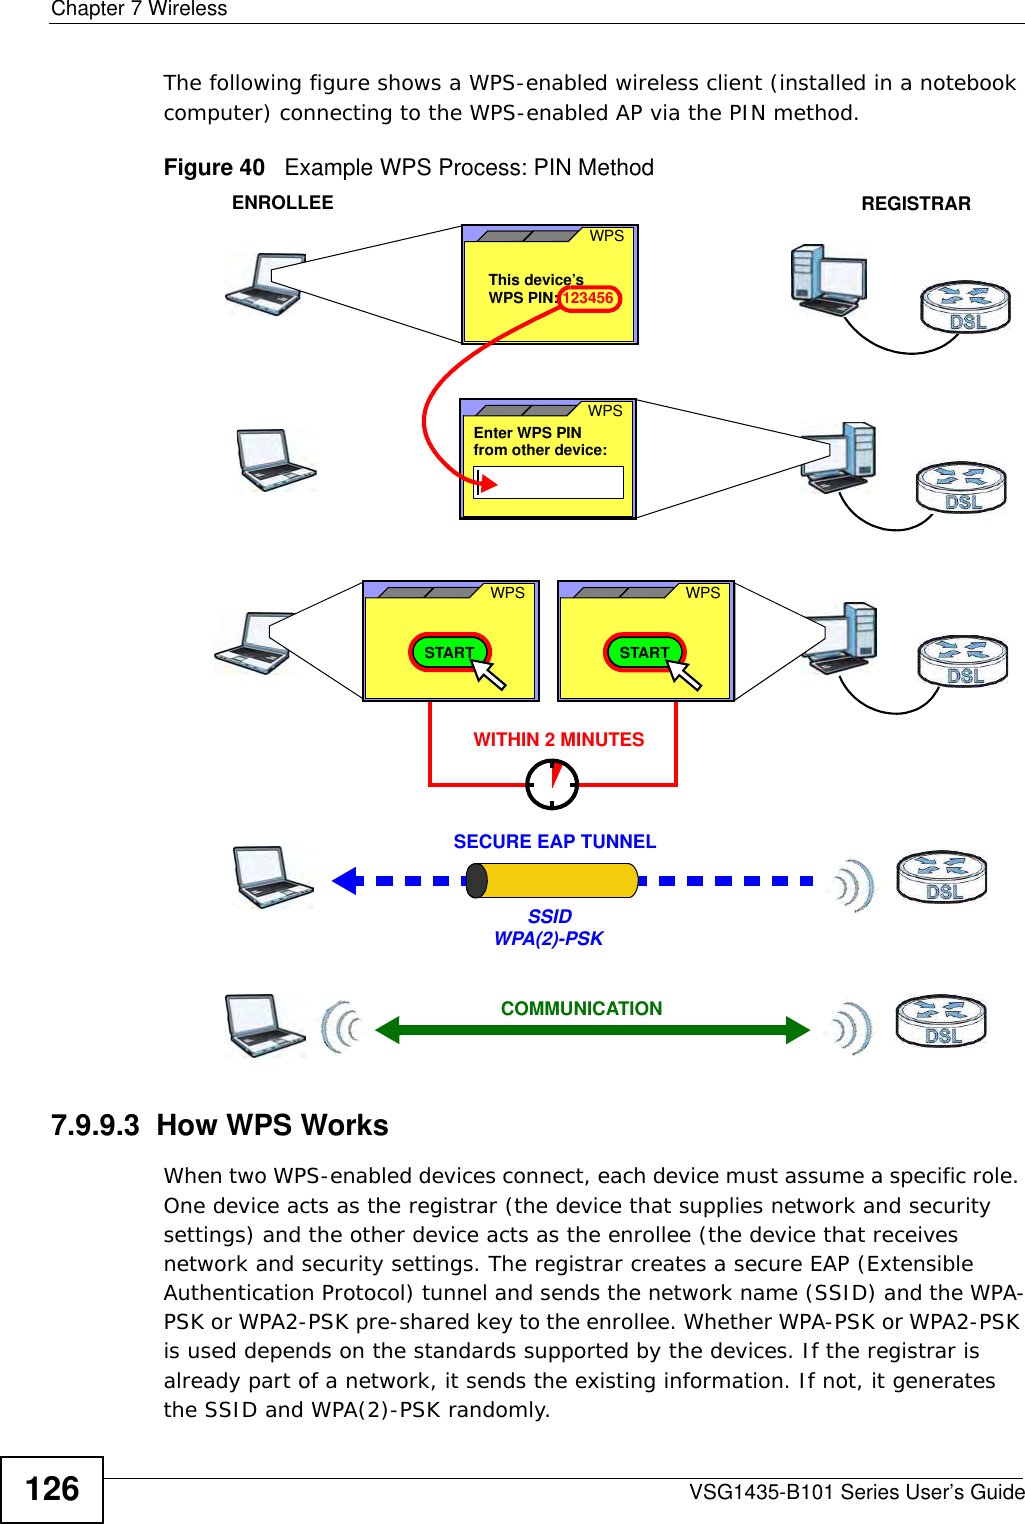 Chapter 7 WirelessVSG1435-B101 Series User’s Guide126The following figure shows a WPS-enabled wireless client (installed in a notebook computer) connecting to the WPS-enabled AP via the PIN method.Figure 40   Example WPS Process: PIN Method7.9.9.3  How WPS WorksWhen two WPS-enabled devices connect, each device must assume a specific role. One device acts as the registrar (the device that supplies network and security settings) and the other device acts as the enrollee (the device that receives network and security settings. The registrar creates a secure EAP (Extensible Authentication Protocol) tunnel and sends the network name (SSID) and the WPA-PSK or WPA2-PSK pre-shared key to the enrollee. Whether WPA-PSK or WPA2-PSK is used depends on the standards supported by the devices. If the registrar is already part of a network, it sends the existing information. If not, it generates the SSID and WPA(2)-PSK randomly.ENROLLEESECURE EAP TUNNELSSIDWPA(2)-PSKWITHIN 2 MINUTESCOMMUNICATIONThis device’s WPSEnter WPS PIN  WPSfrom other device: WPS PIN: 123456WPSSTARTWPSSTARTREGISTRAR